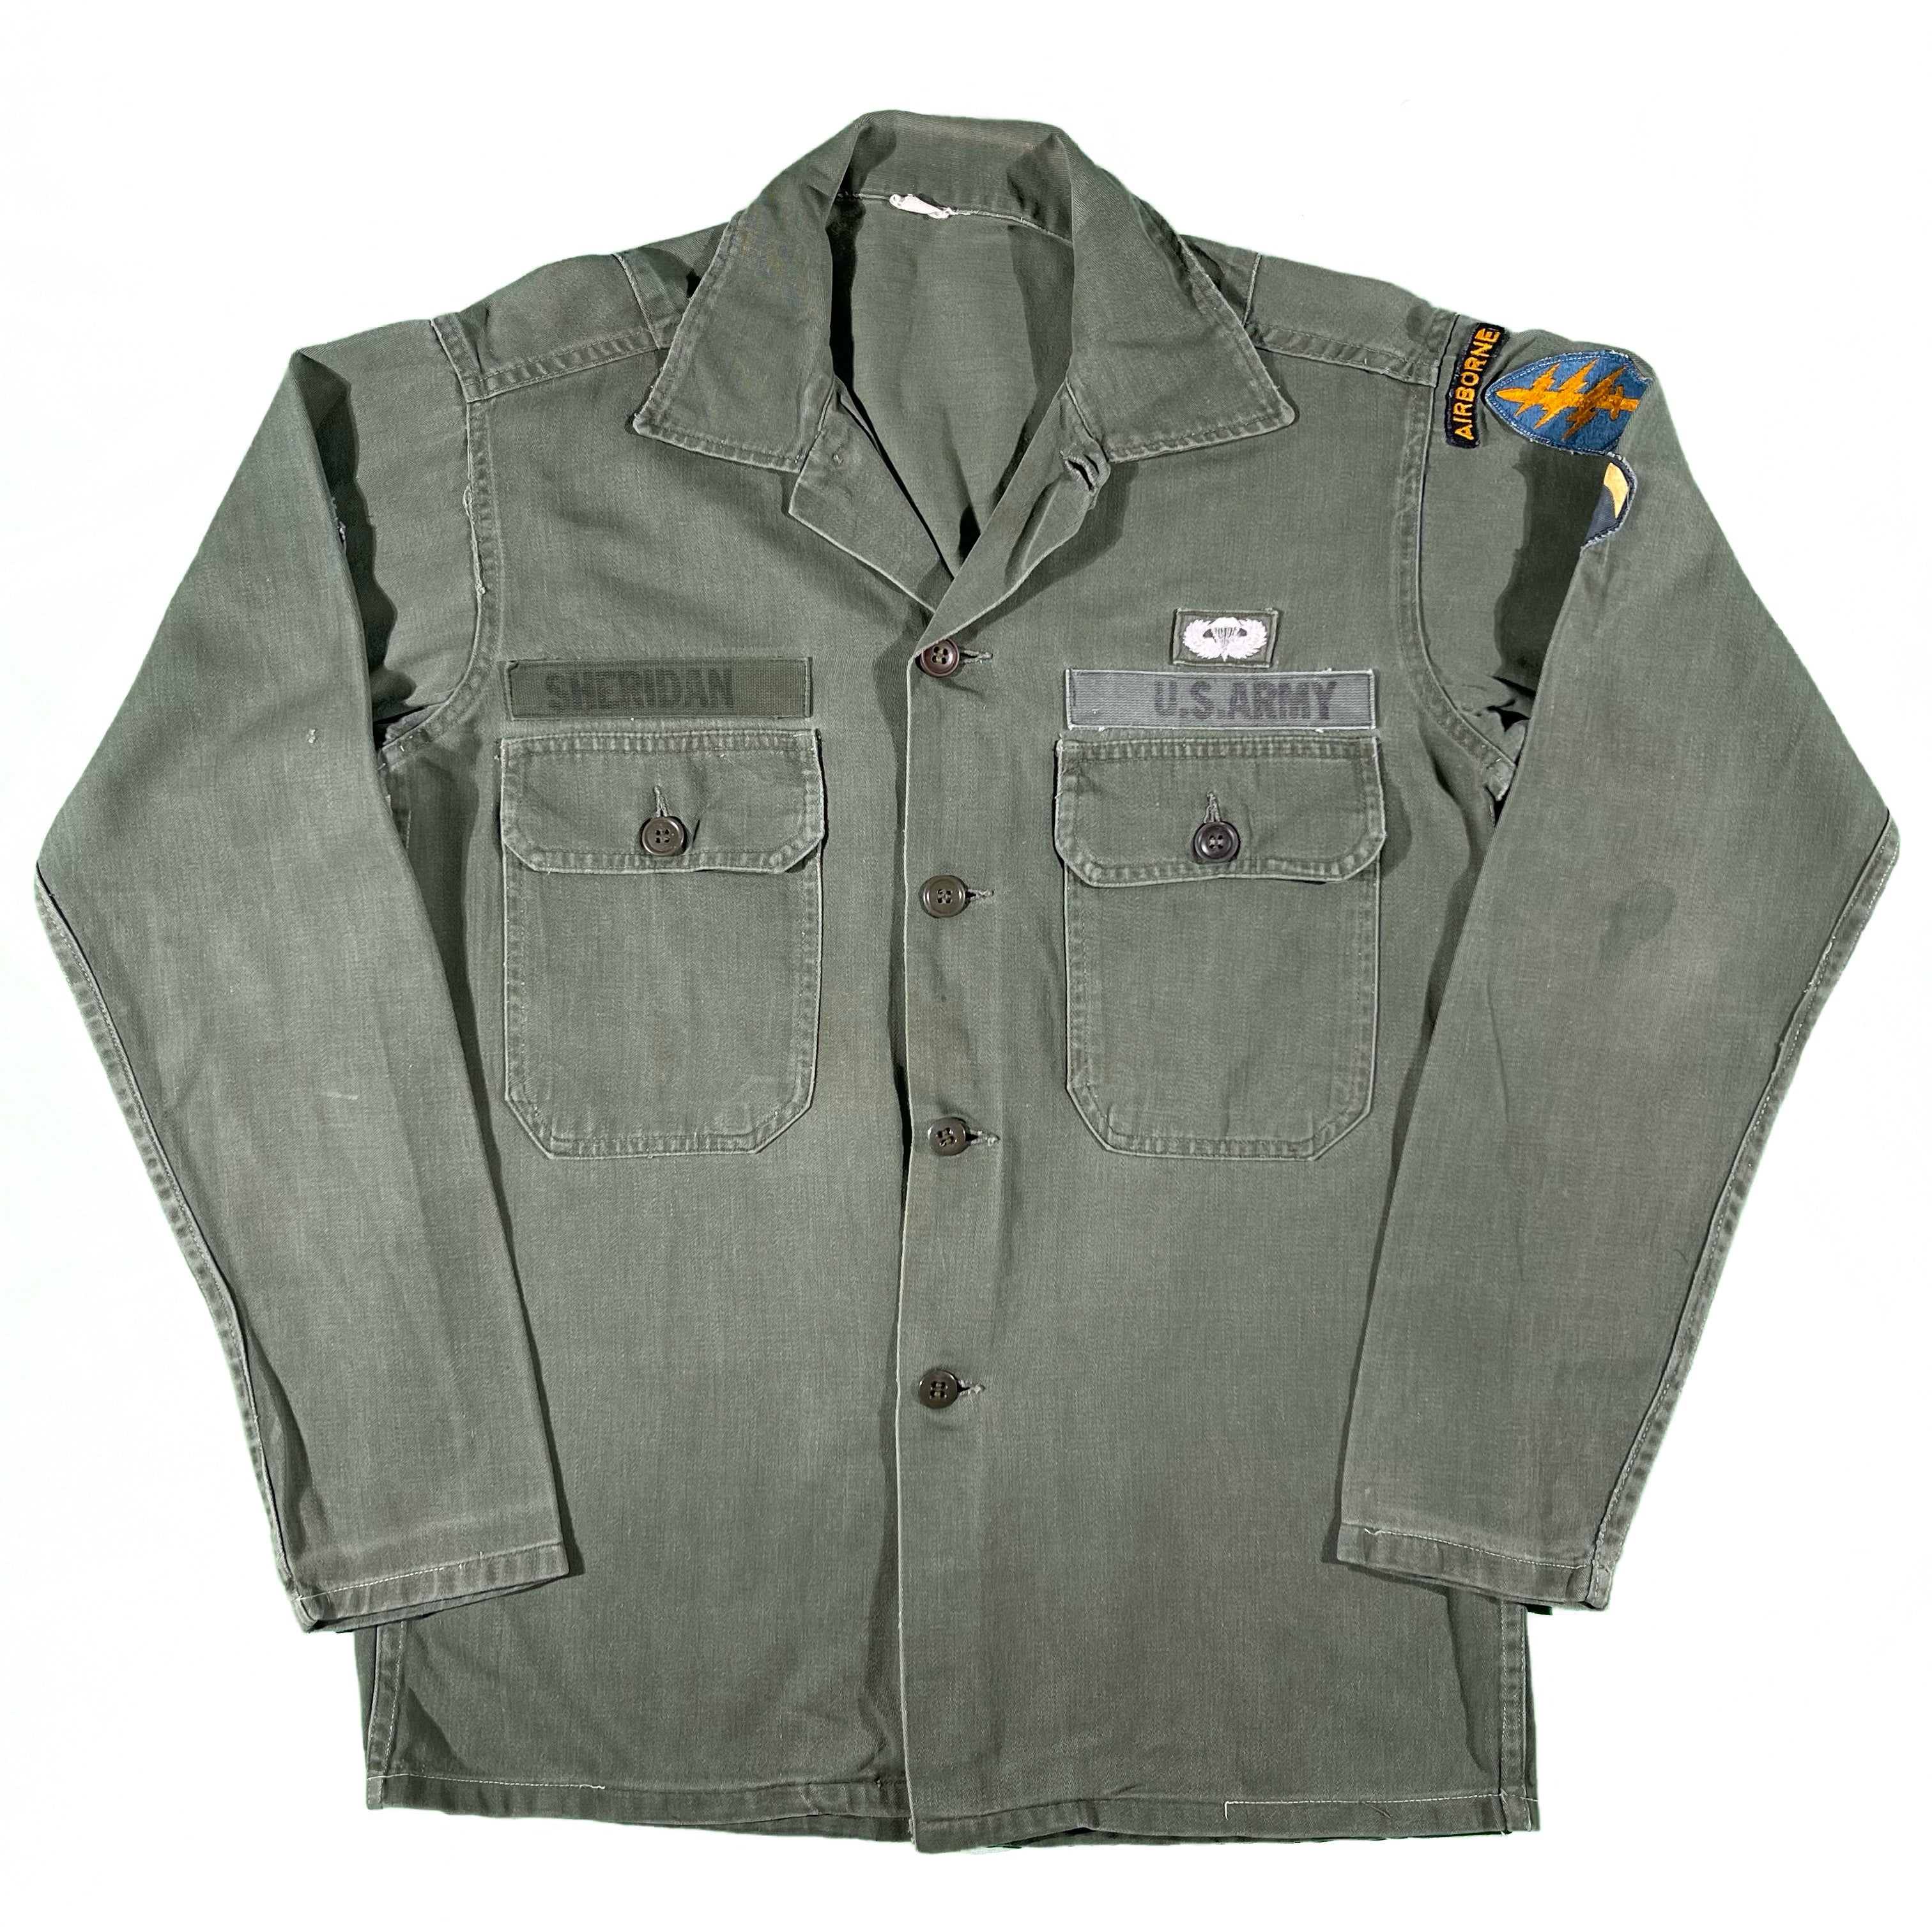 60s/70s US Army OG-107 Utility Shirt- XS,S,M,L